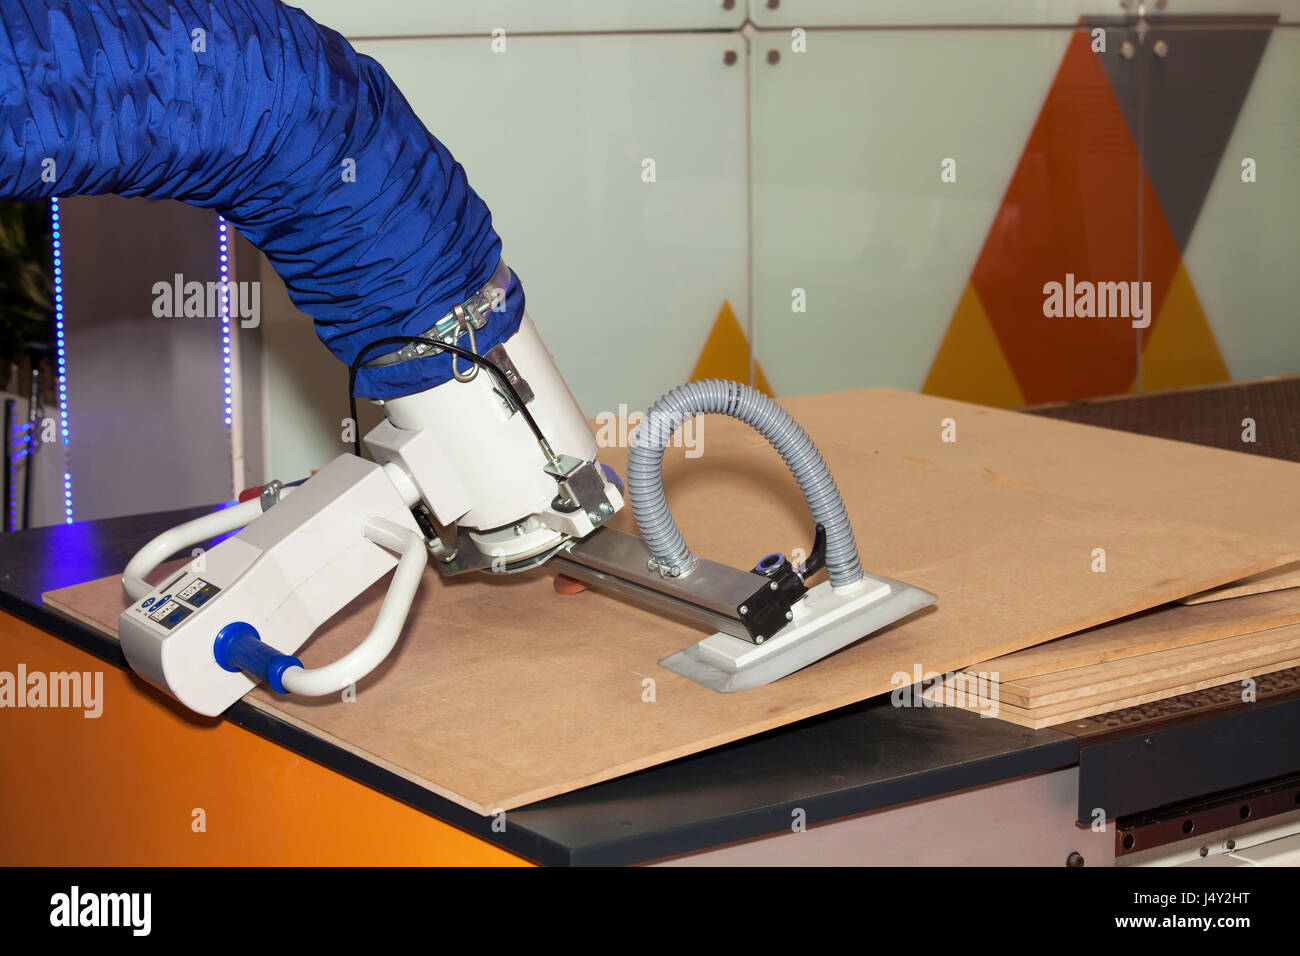 Vacuum lifter and crane system, vacuum technology for automation Stock Photo